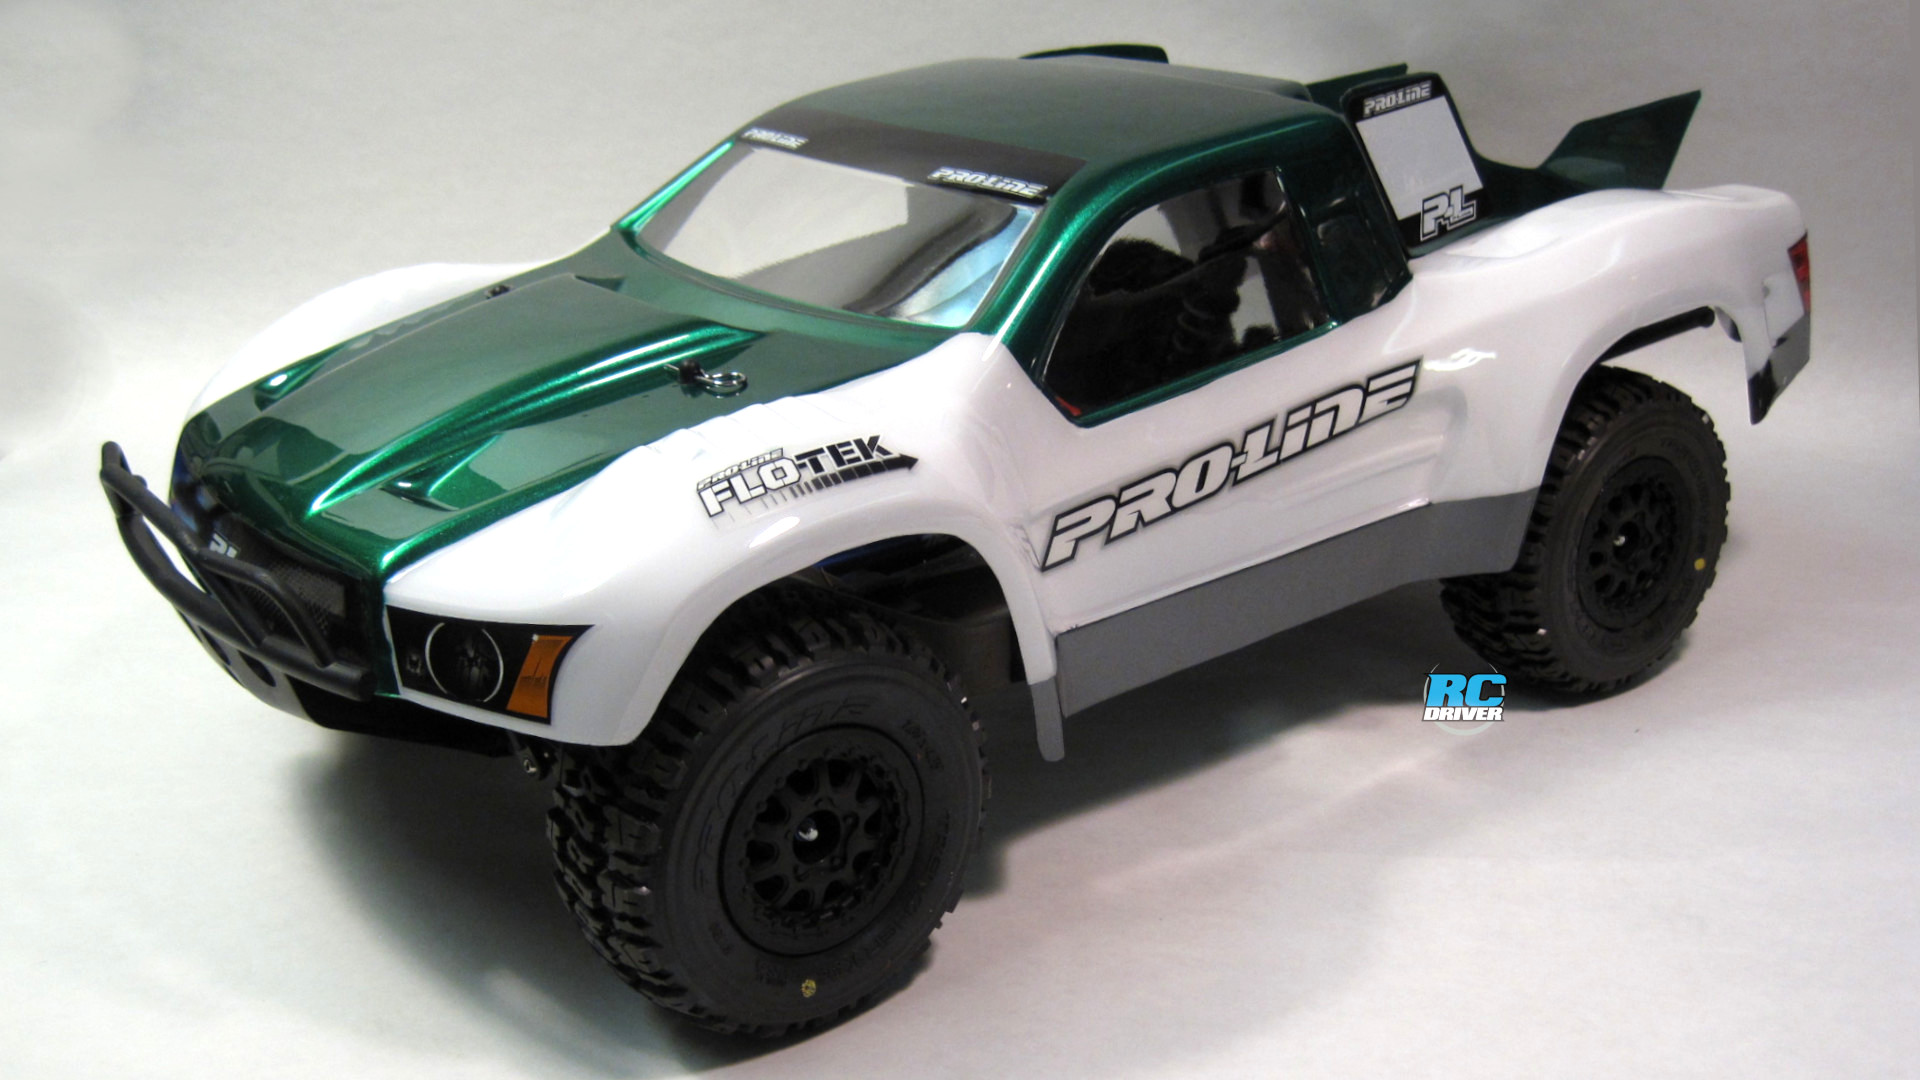 Simple rattle can paint scheme that anyone can do - RC Driver